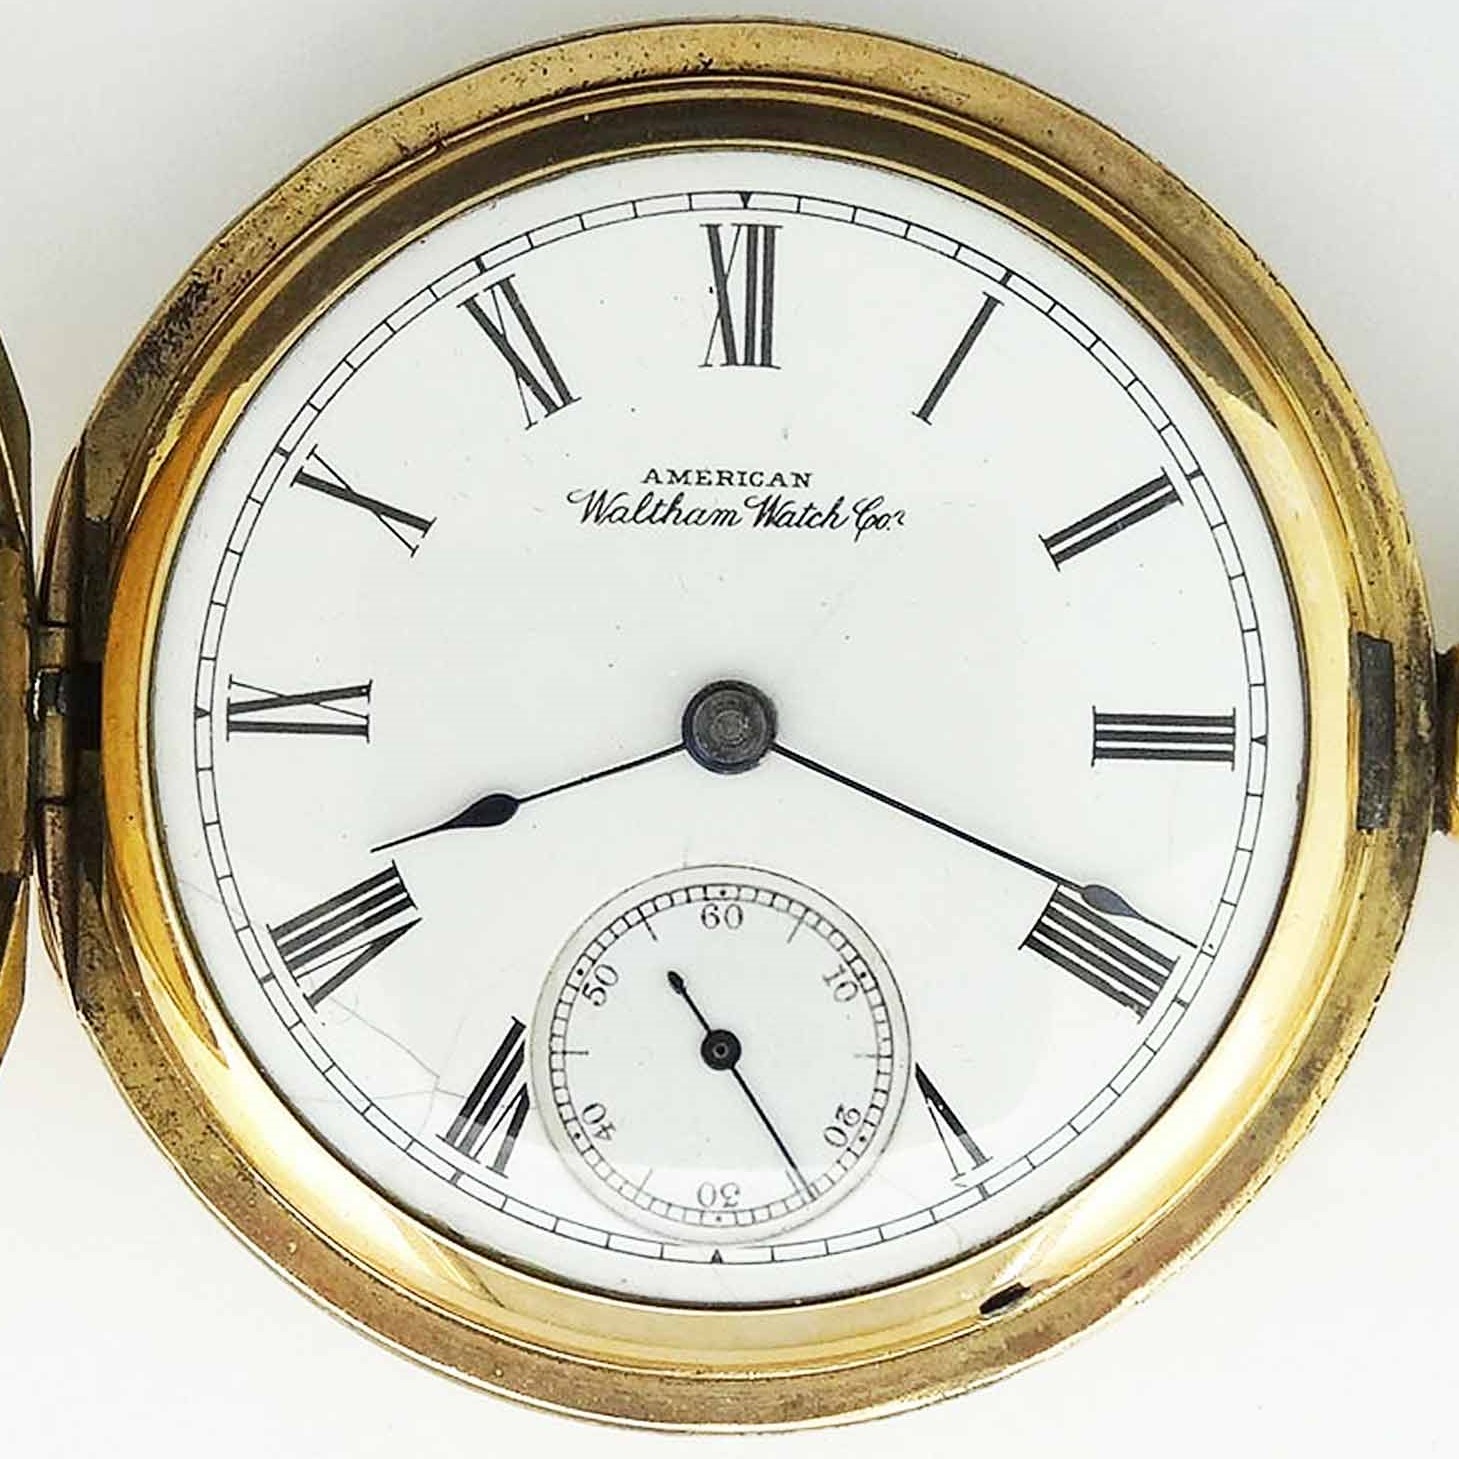 Image of a pocket watch.